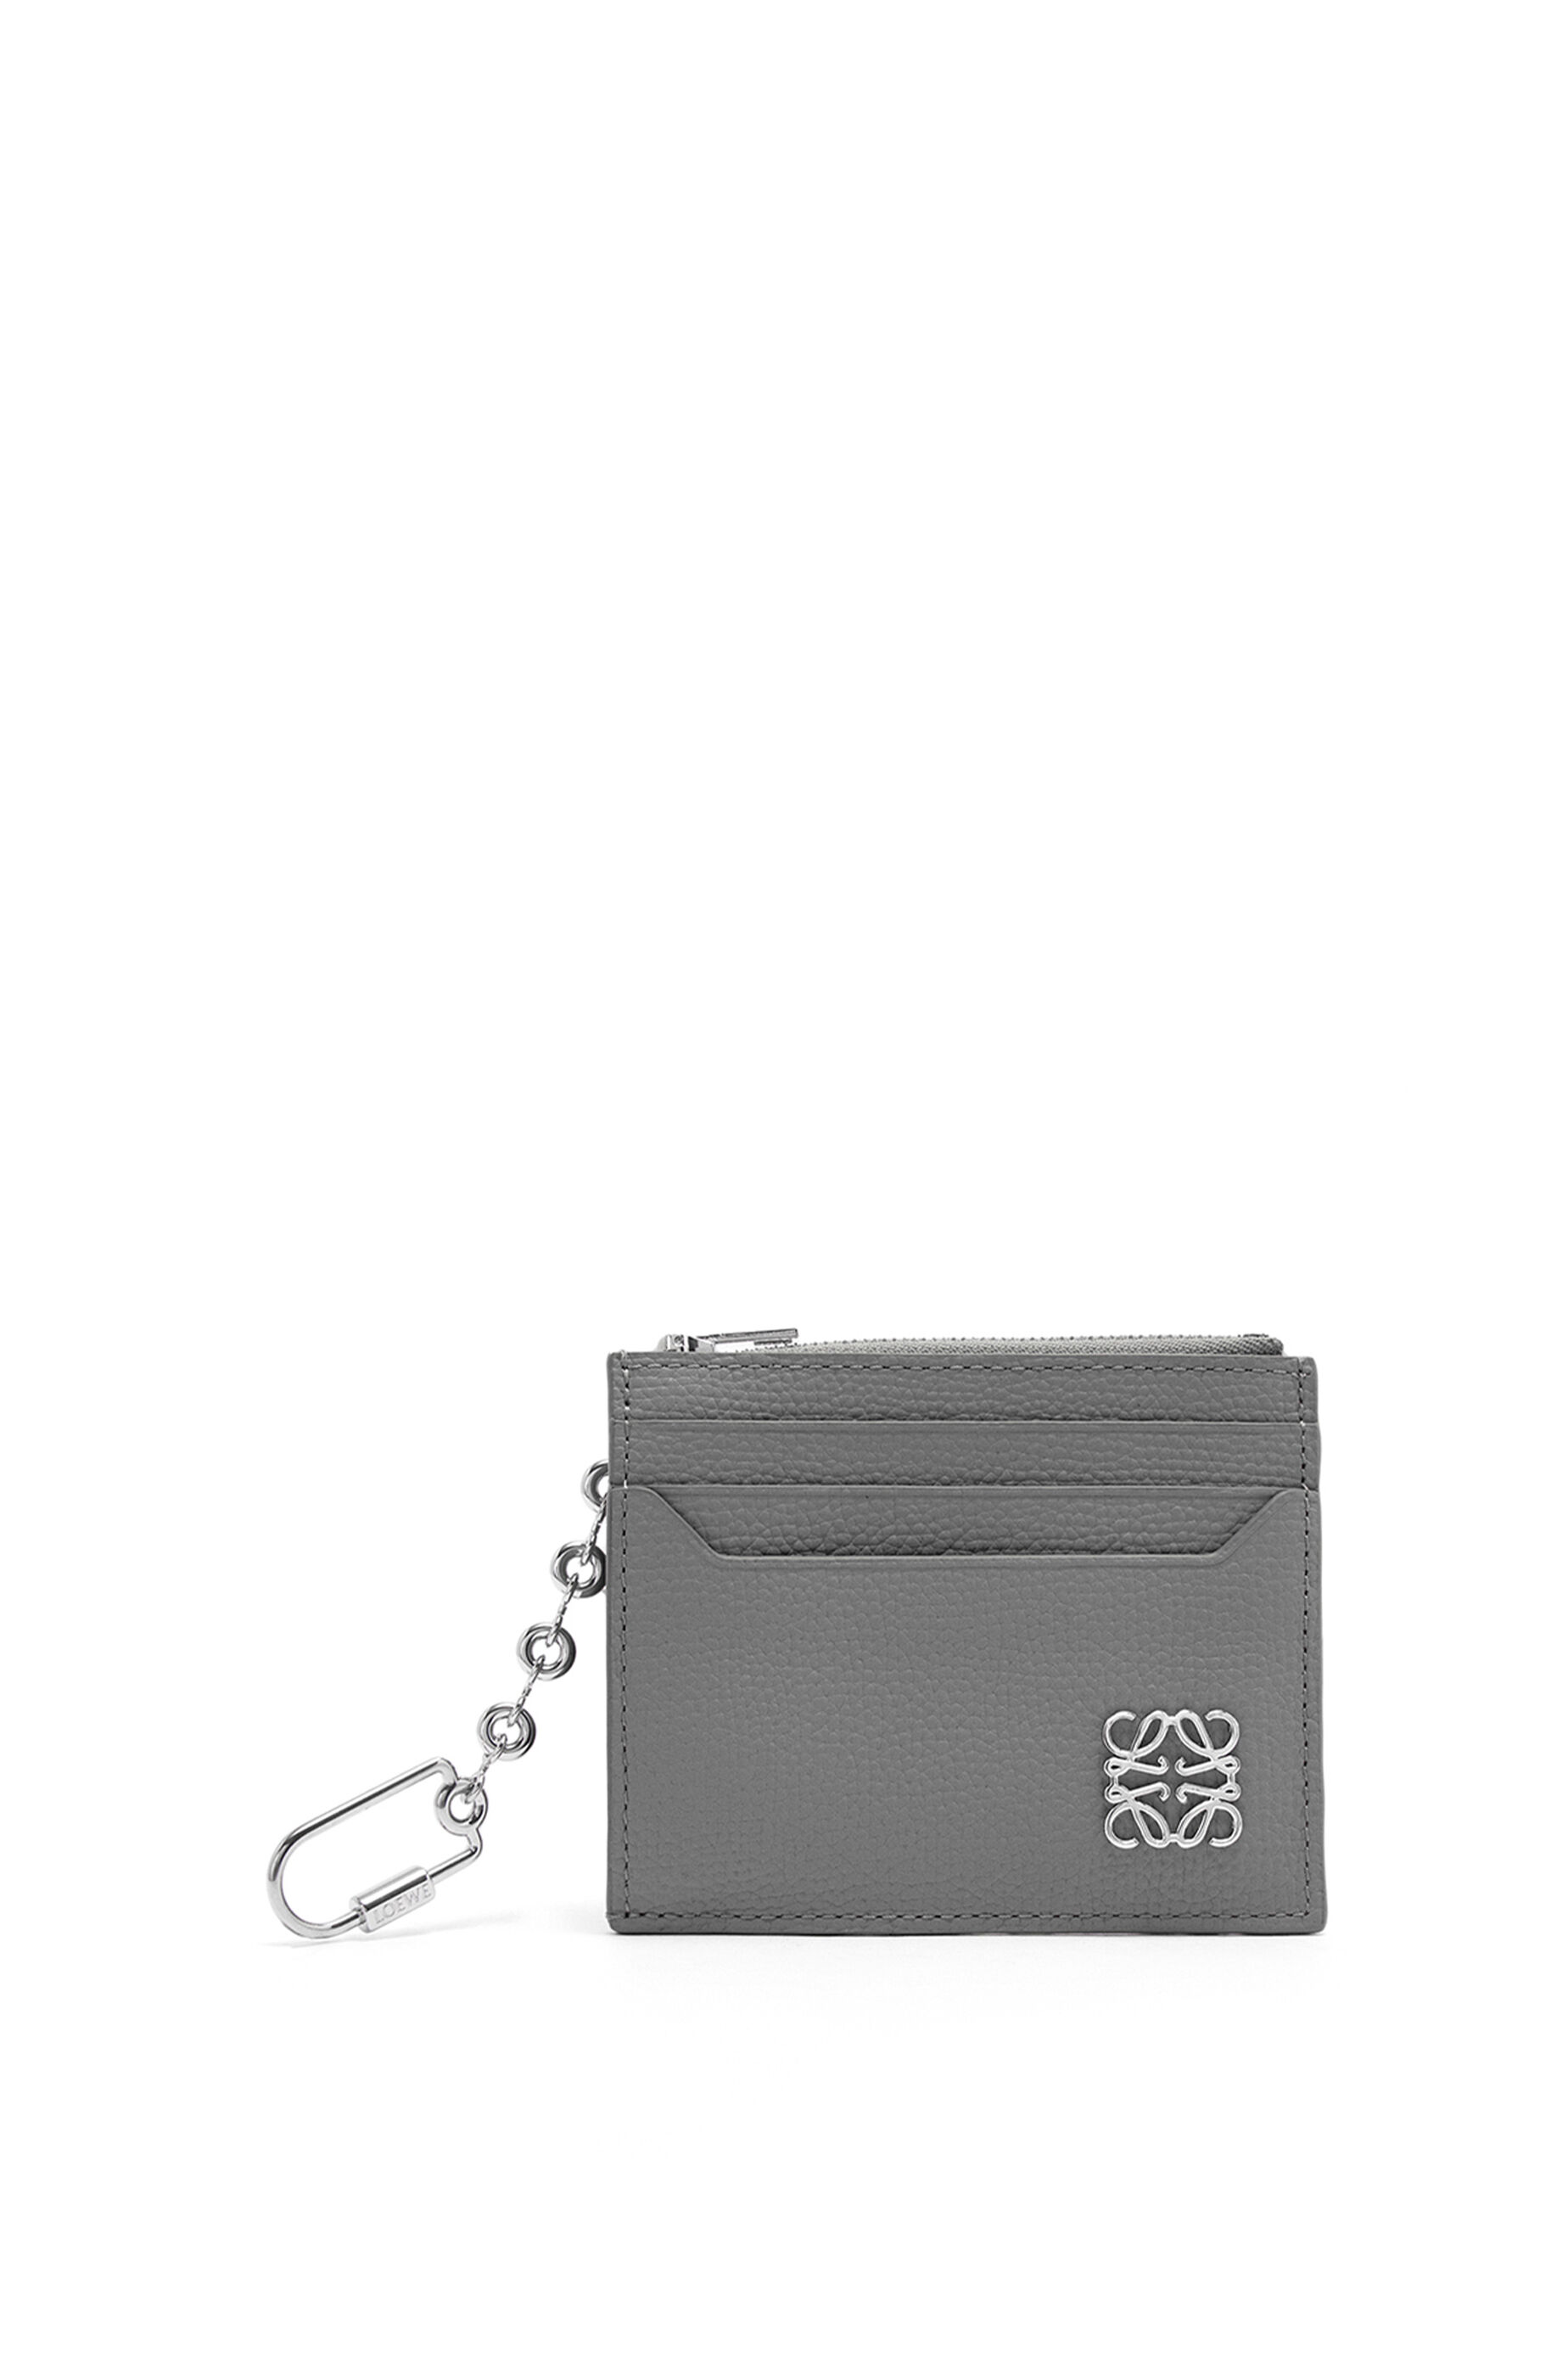 Grey Old Nordic Linked Motif With Triangles Coin Pouch Clutch Purse Wristlet Wallet Phone Card Holder Handbag